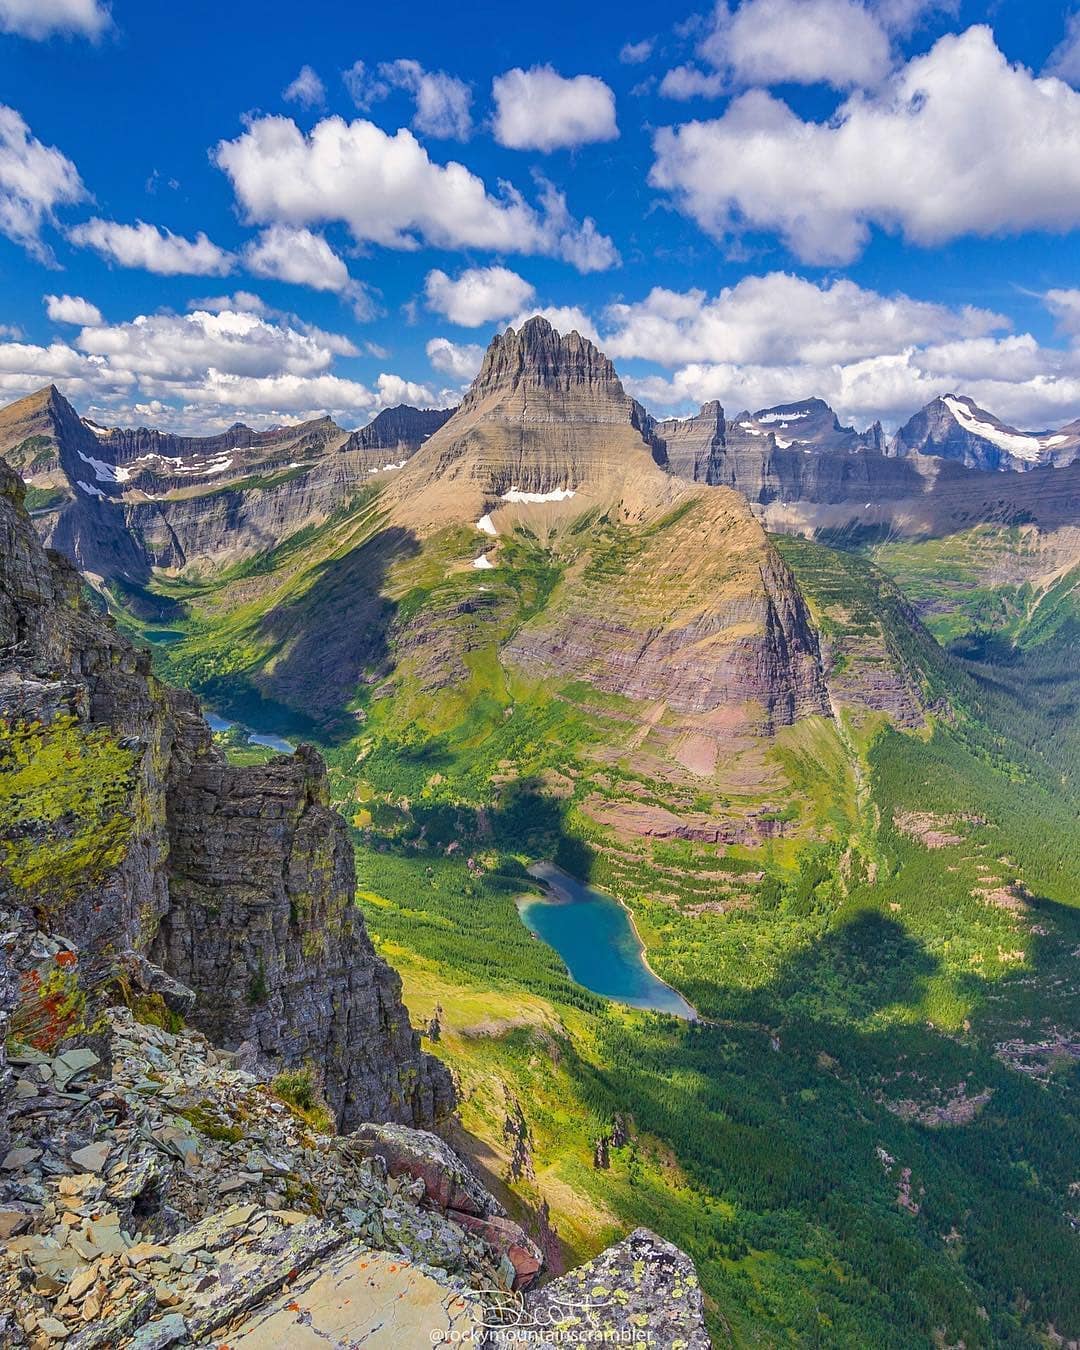 6 Great Summer Hikes in the United States - Glacier National Park in Montana